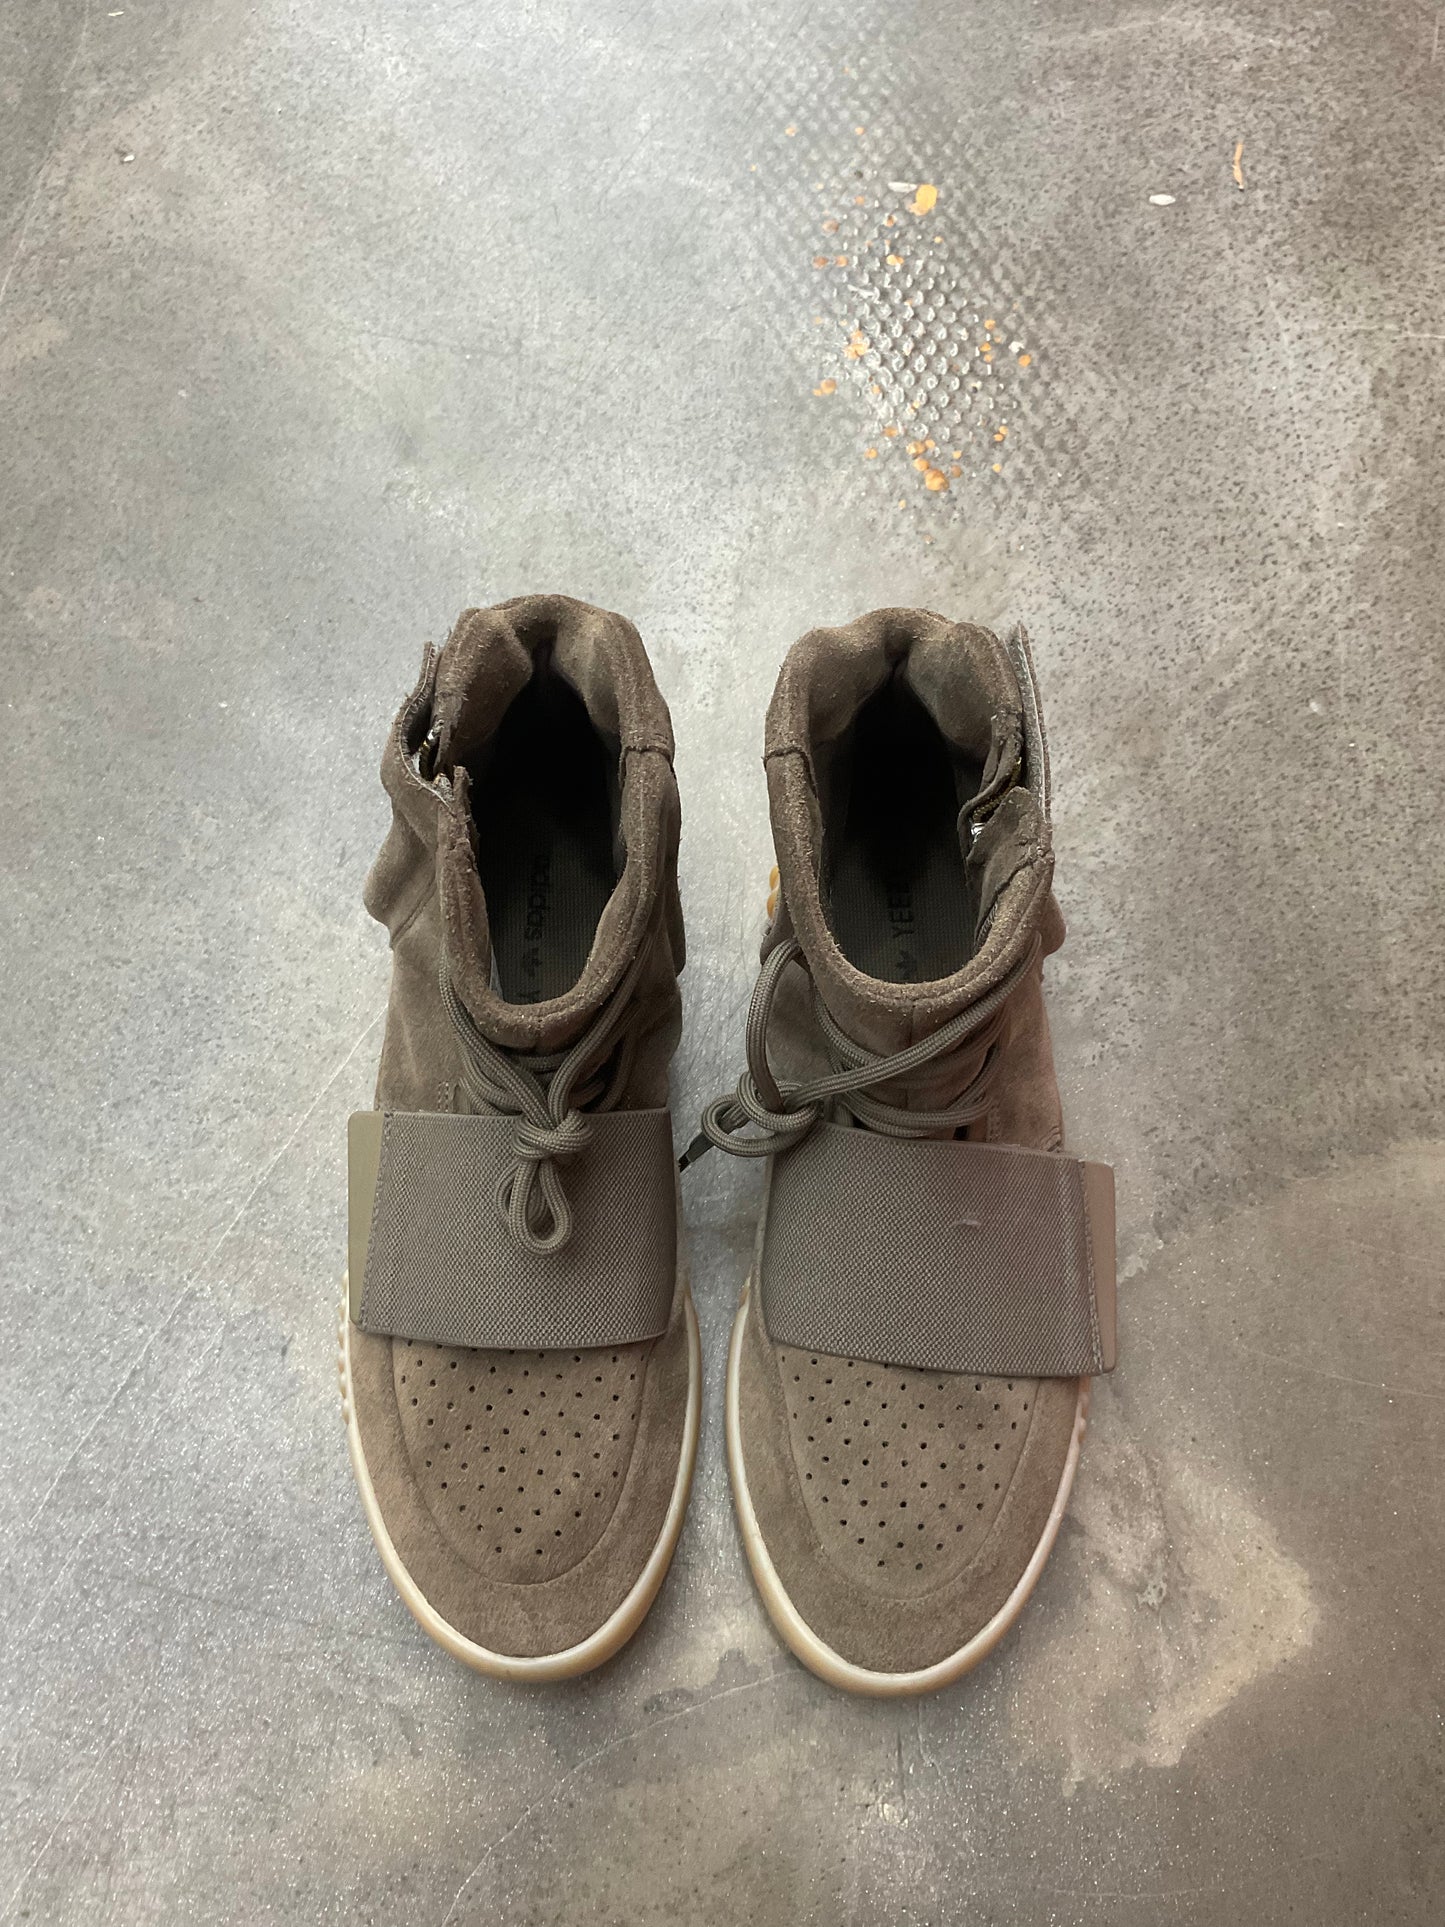 Pre-owned adidas Yeezy Boost 750 Chocolate Size 9.5 NO BOX